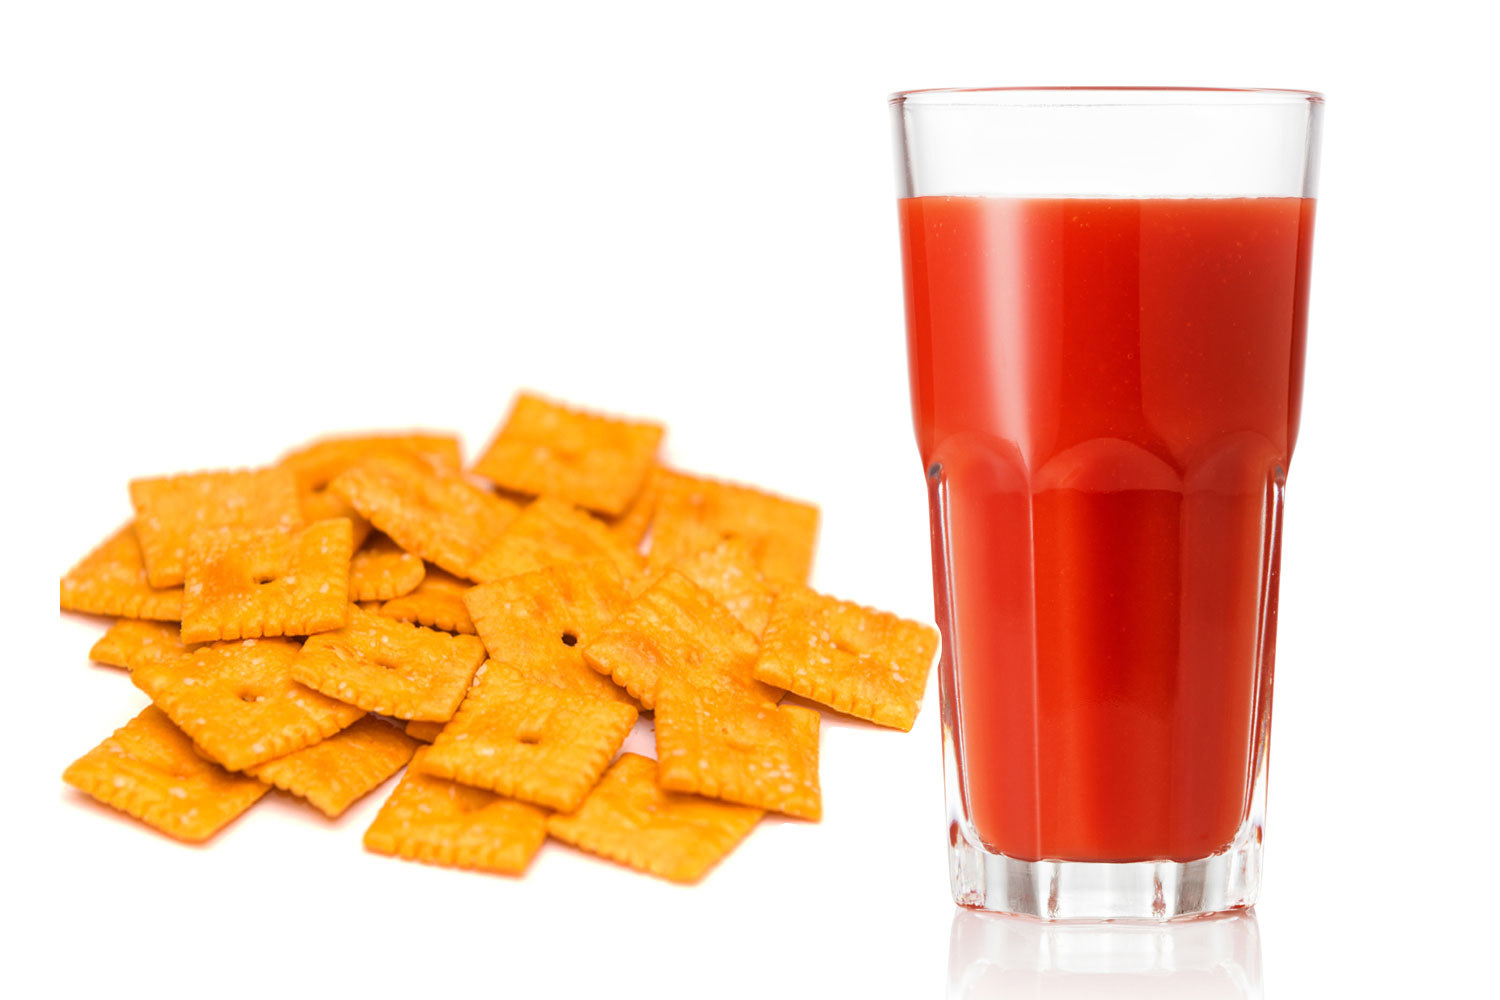 Cheez-It crackers and tomato juice in a glass.